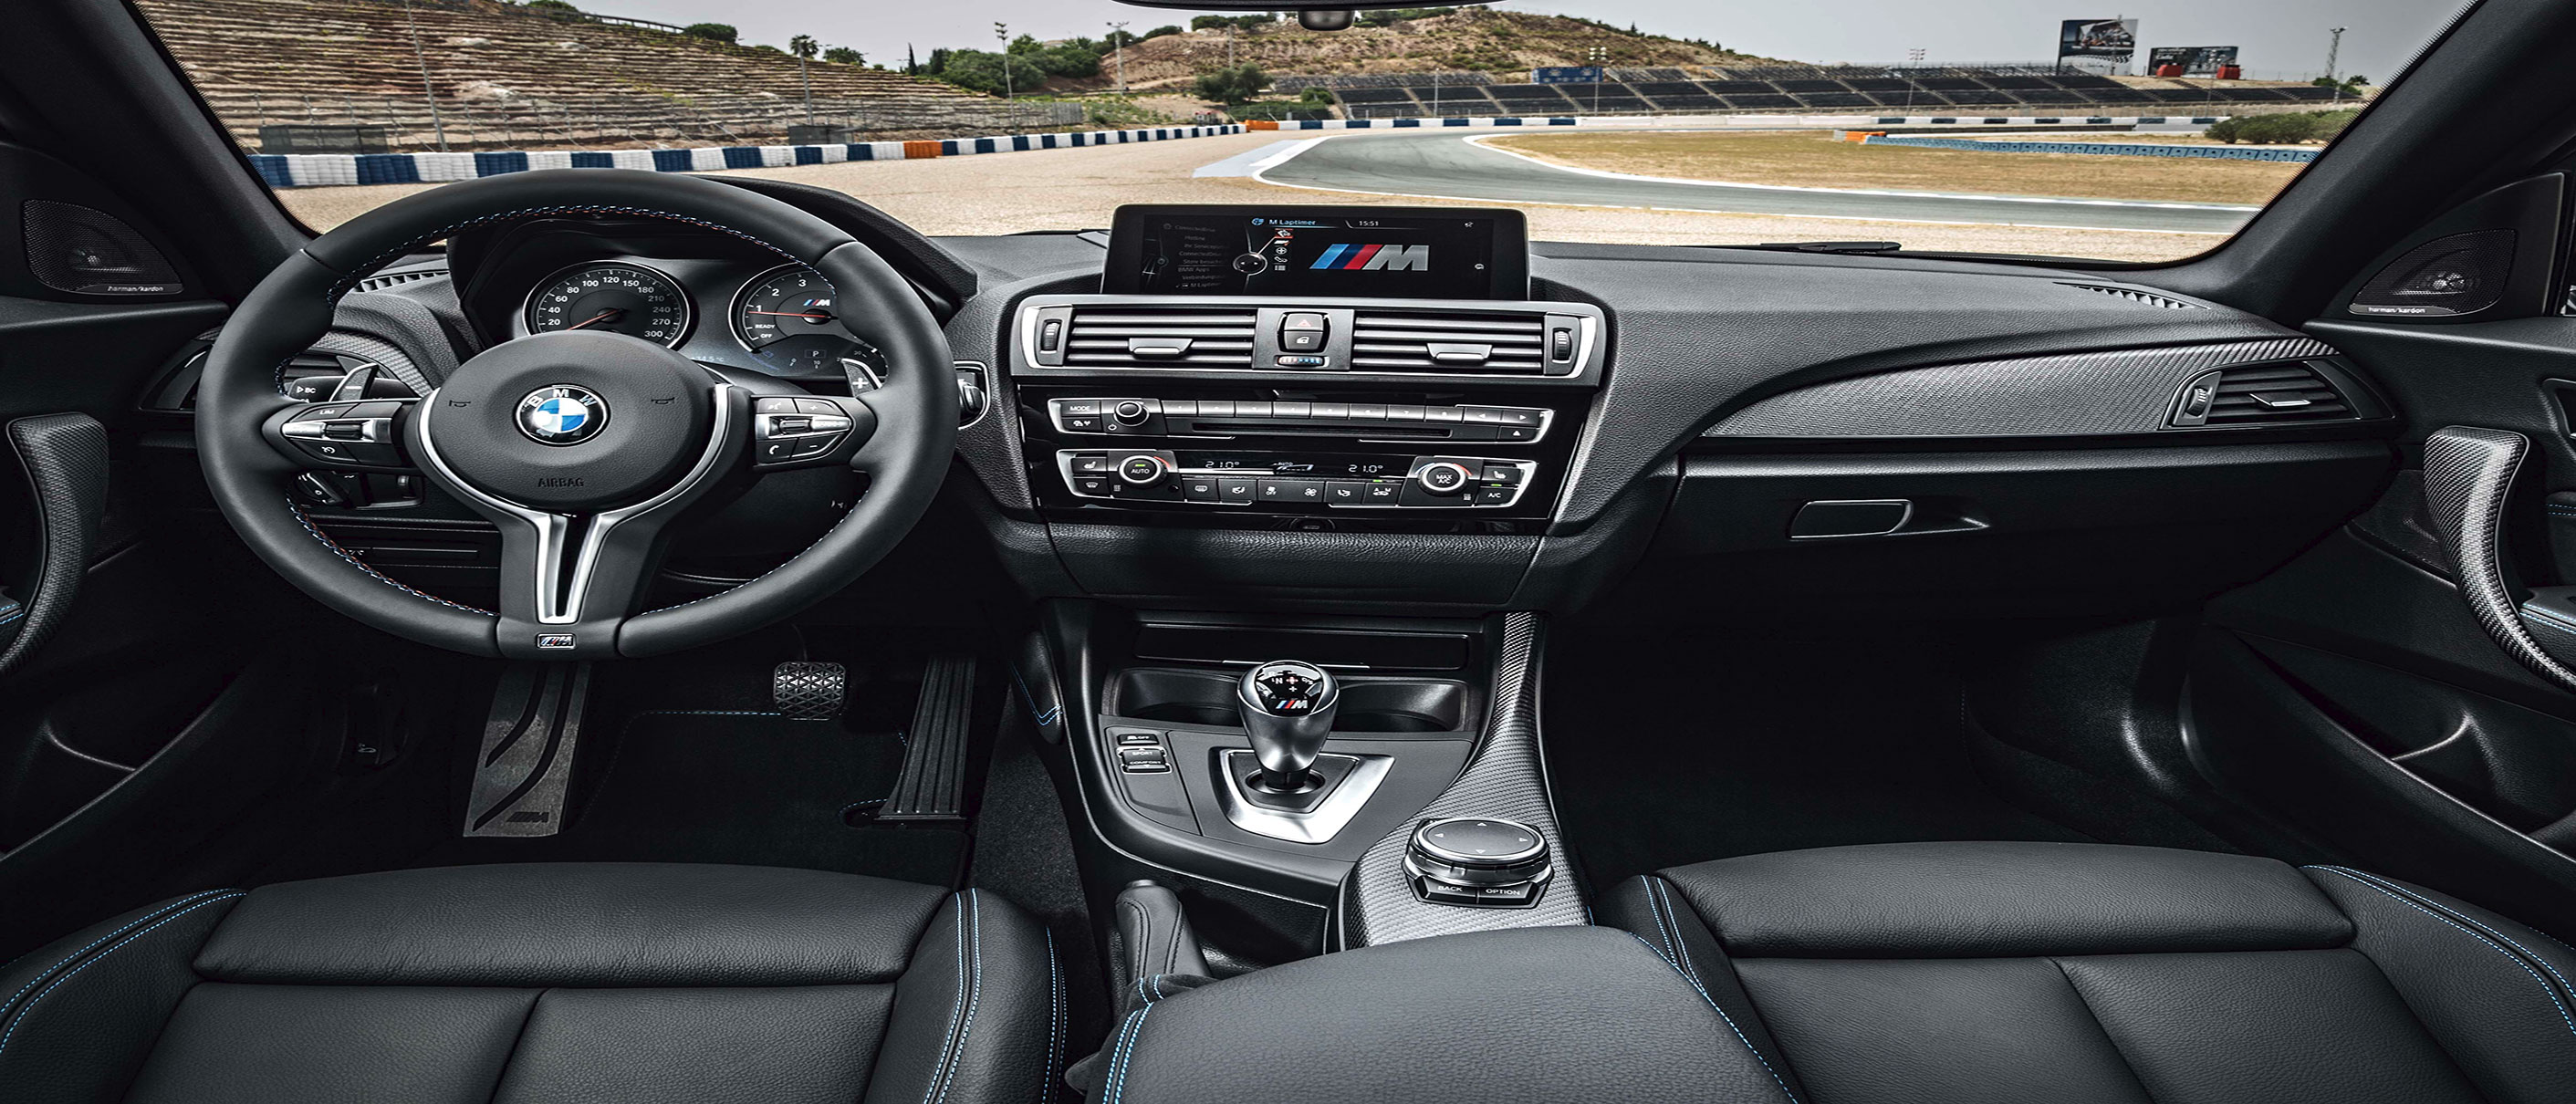 2016 BMW M2 Coupe: Be Impactful